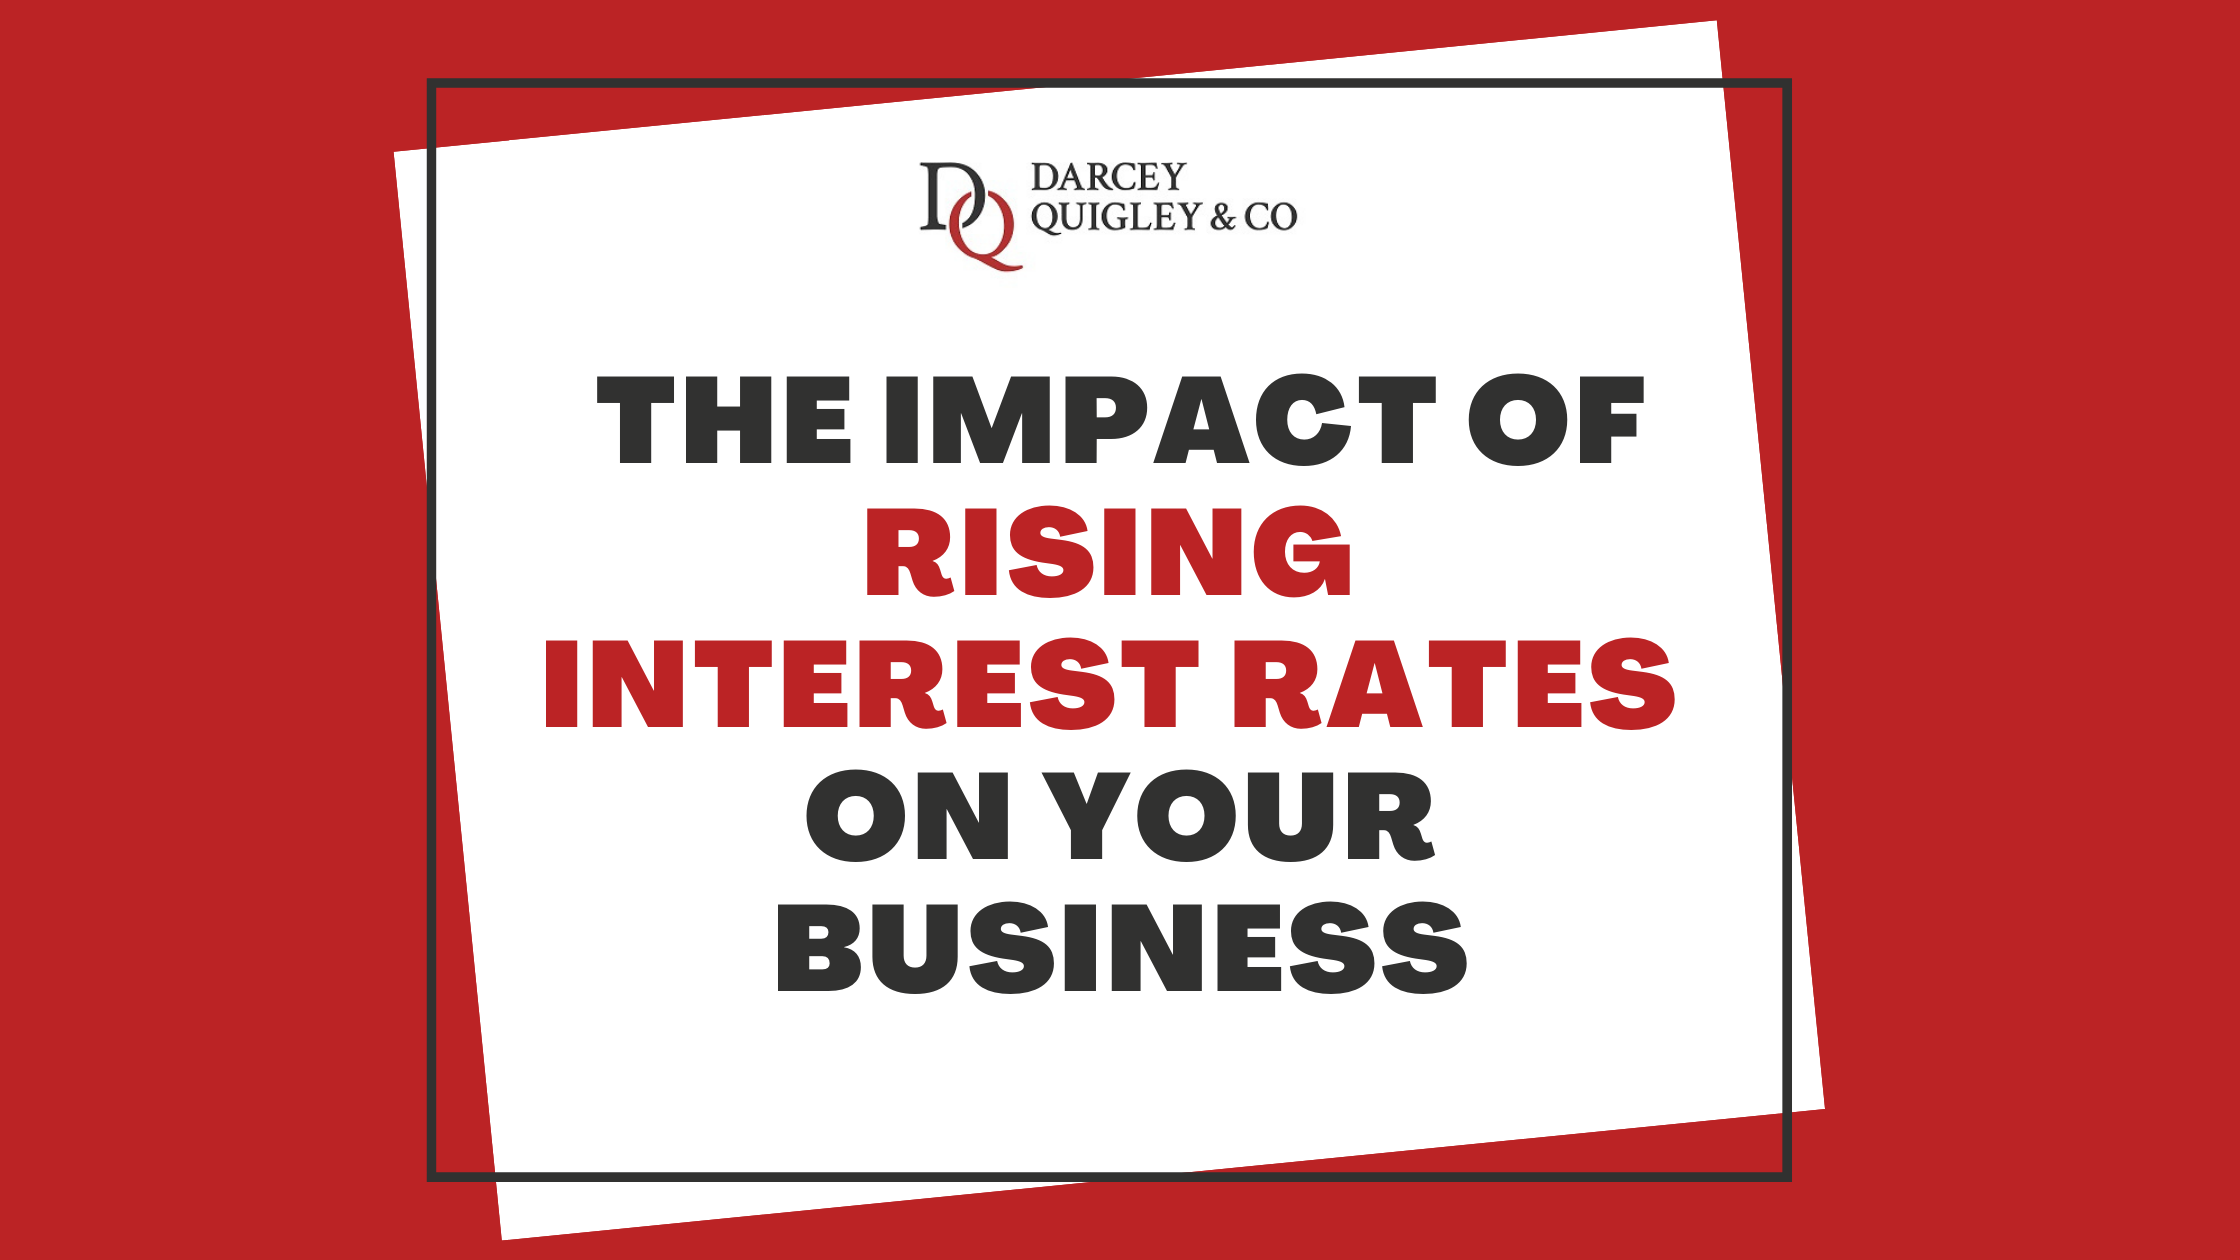 The Impact of Rising Interest Rates On Your Business